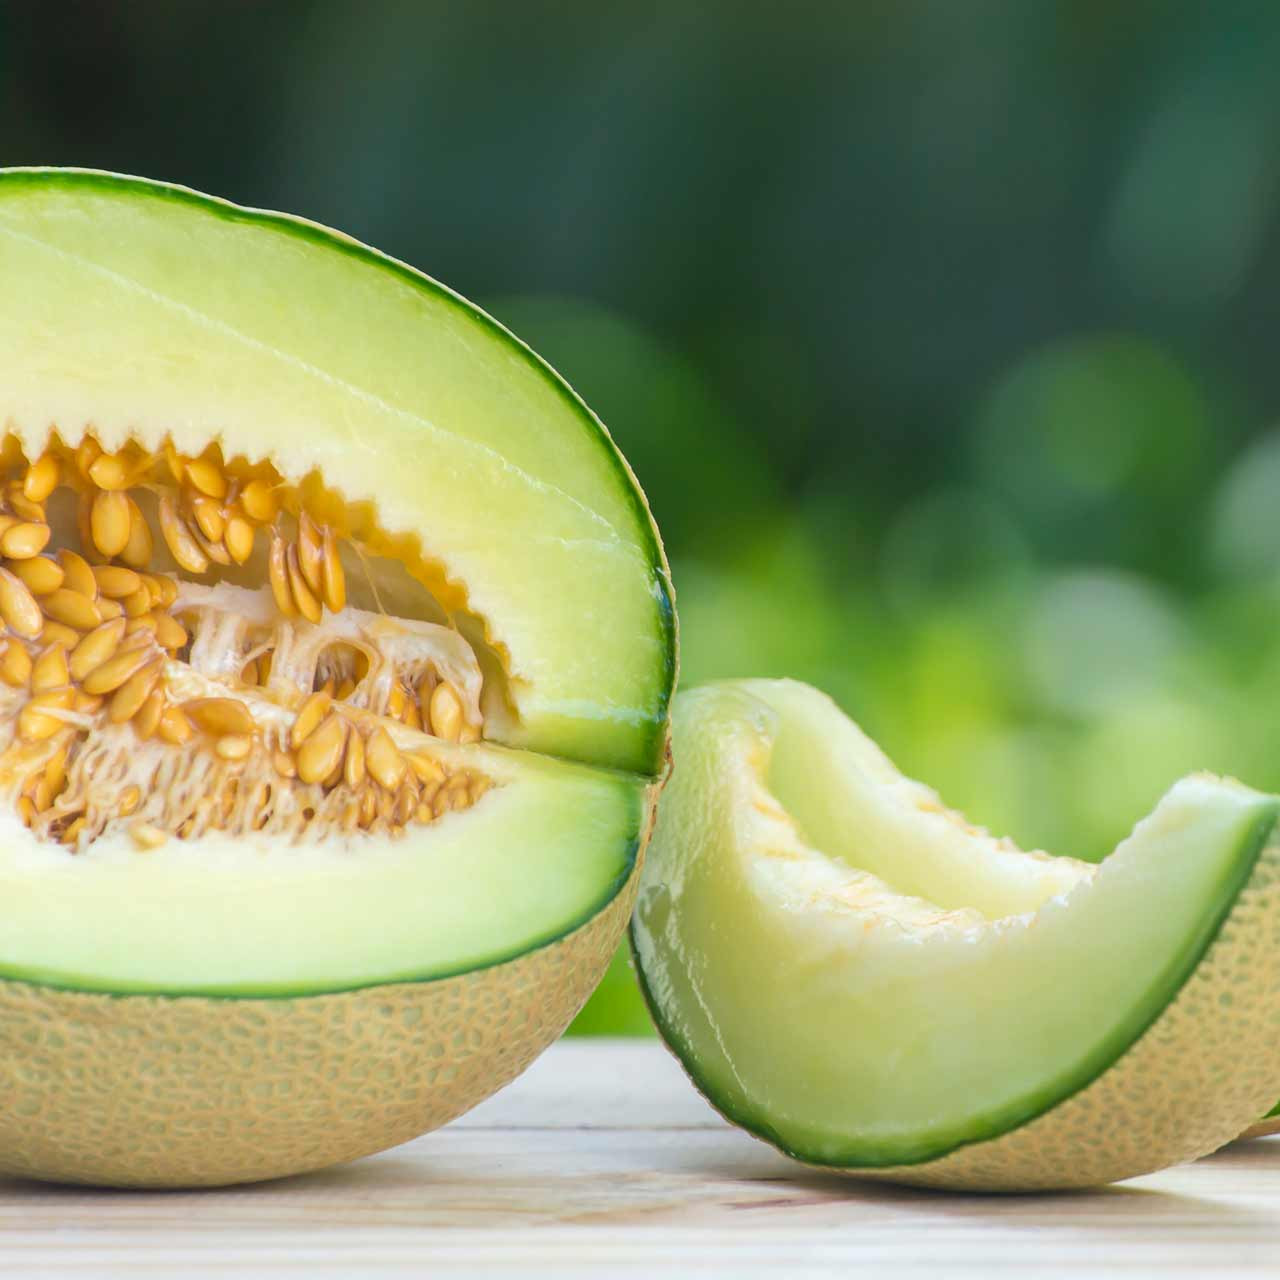 Rocky Ford Green Fleshed Cantaloupe (Cucumis melo) 